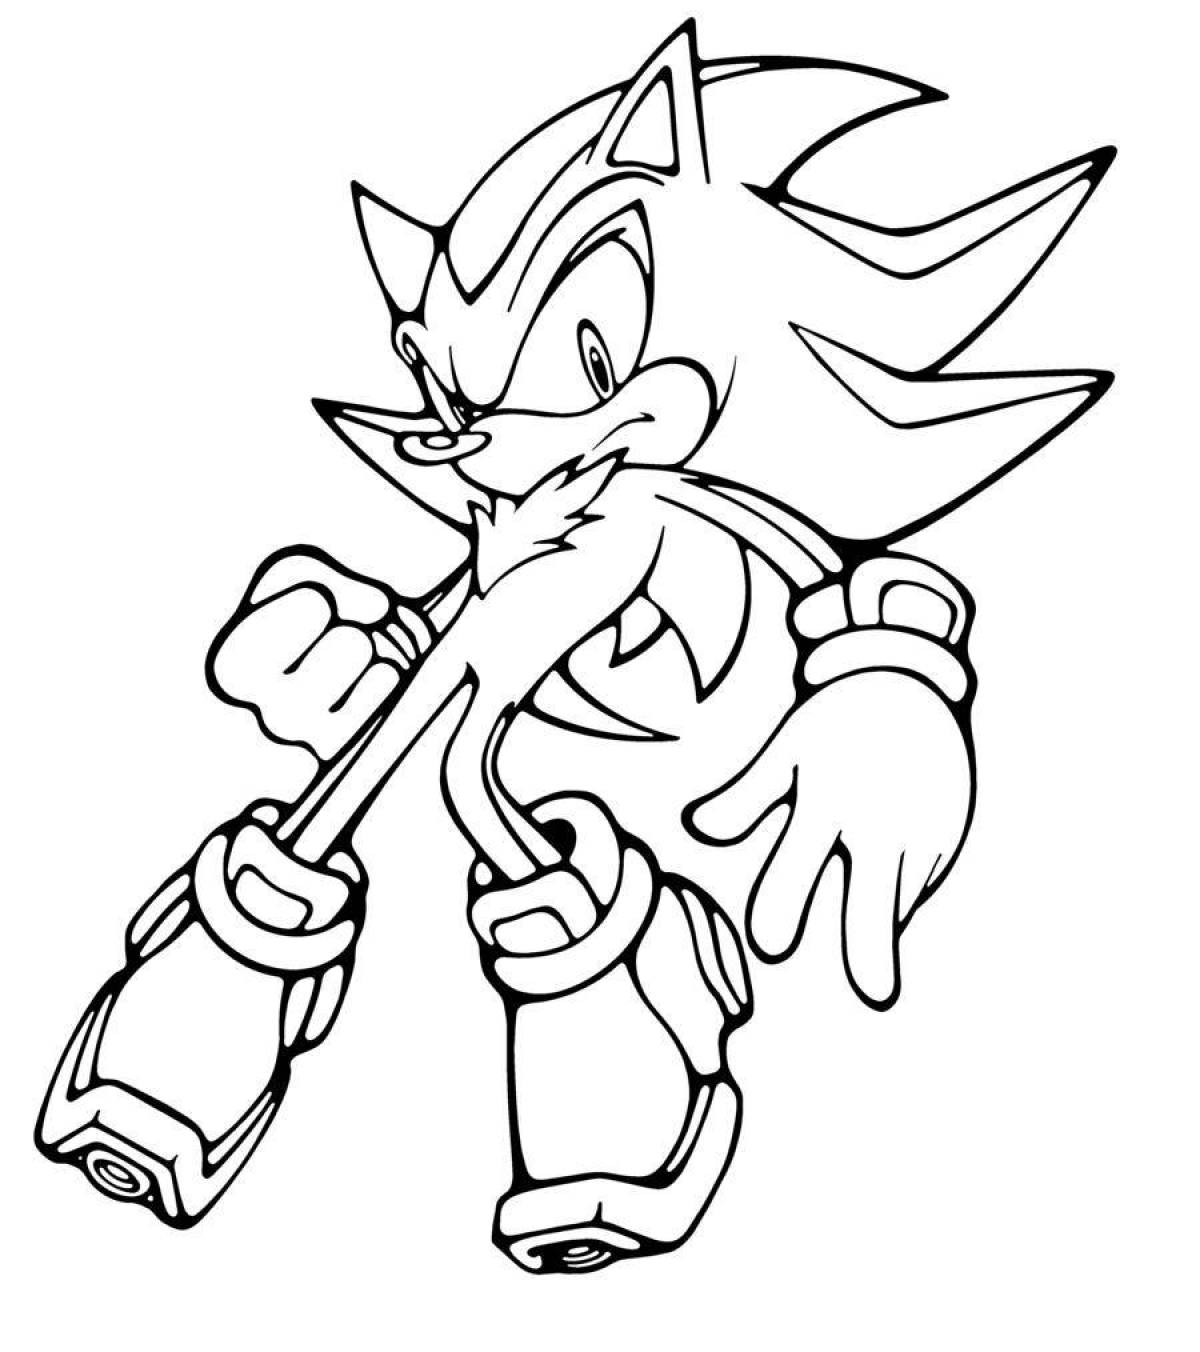 Dazzling sonic force coloring book